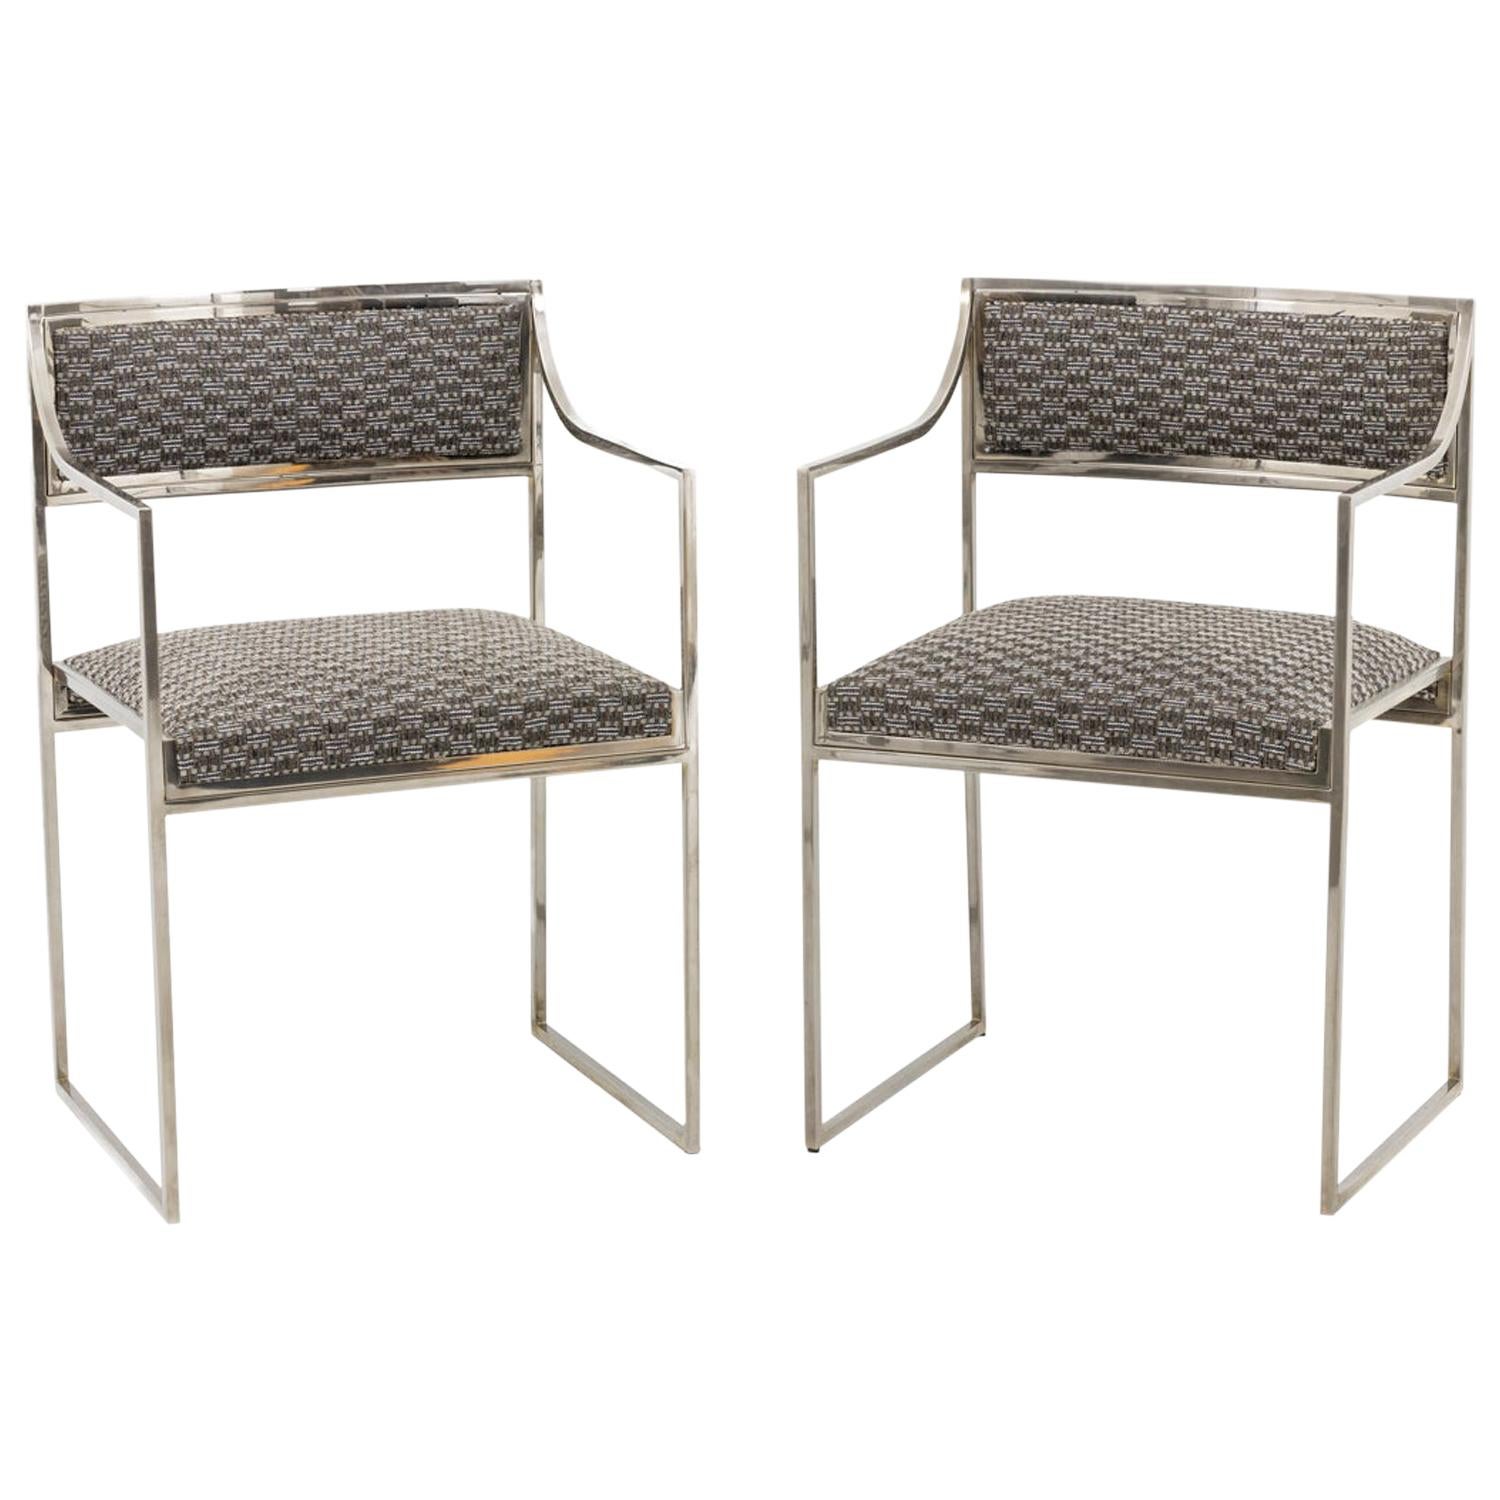 Willy Rizzo, Pair of Chromed Metal Armchairs, 1970s